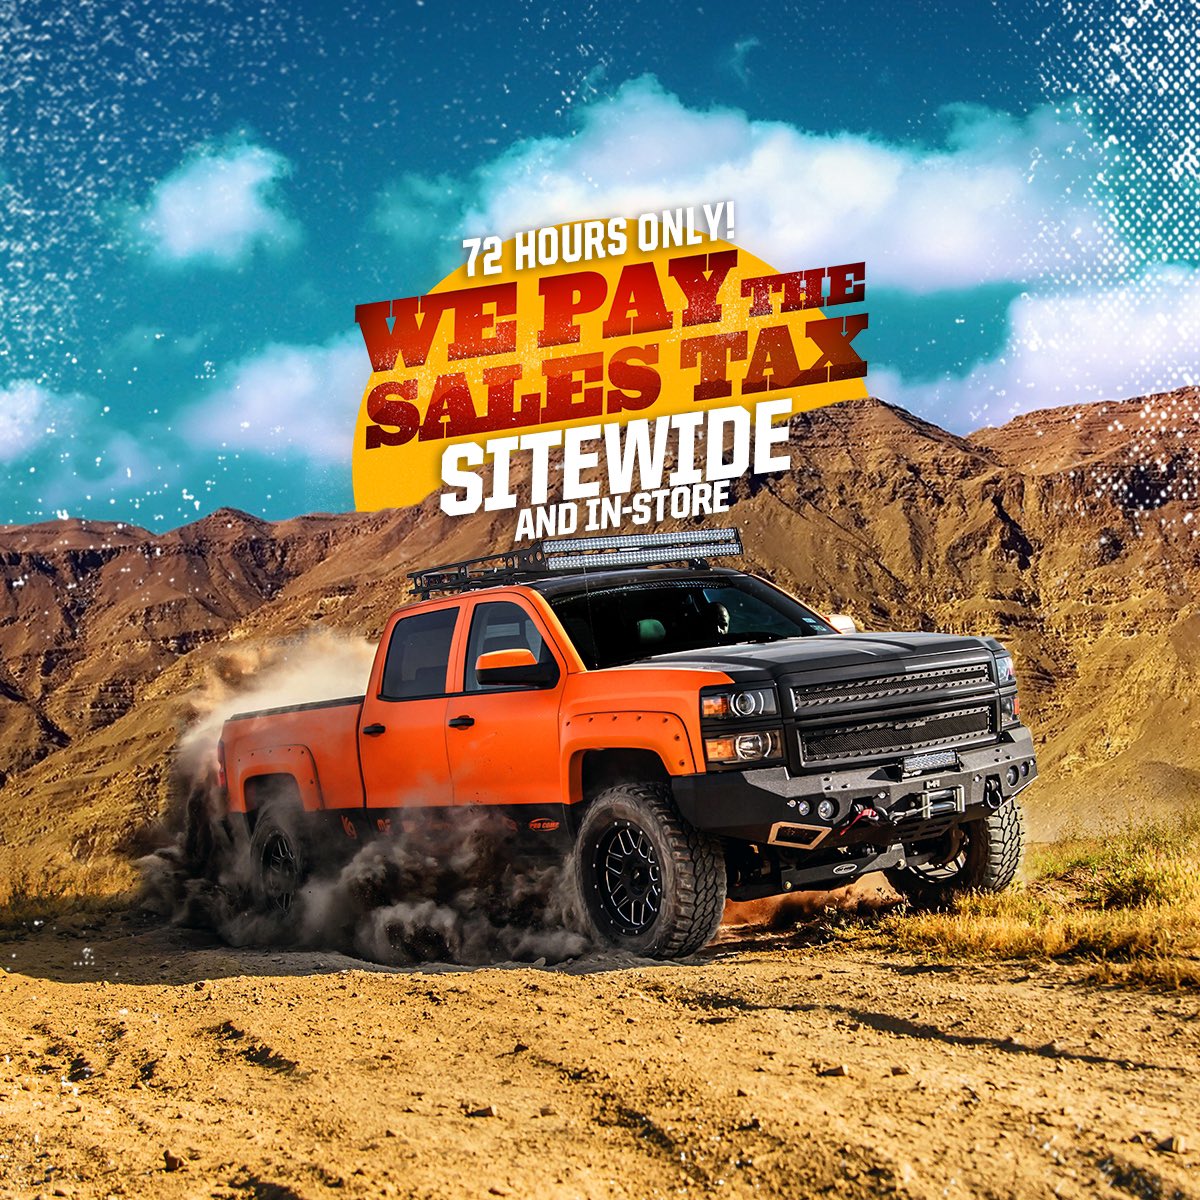 We Pay The Sales Tax All Weekend Long! The Hottest Deals of the Summer are at #4WP! Call us at (877) 474-4821 Buy Online and Pick Up In-Store! #4WPEndlessSummer 4wheelparts.com *Offer valid from 8/16 - 8/18.